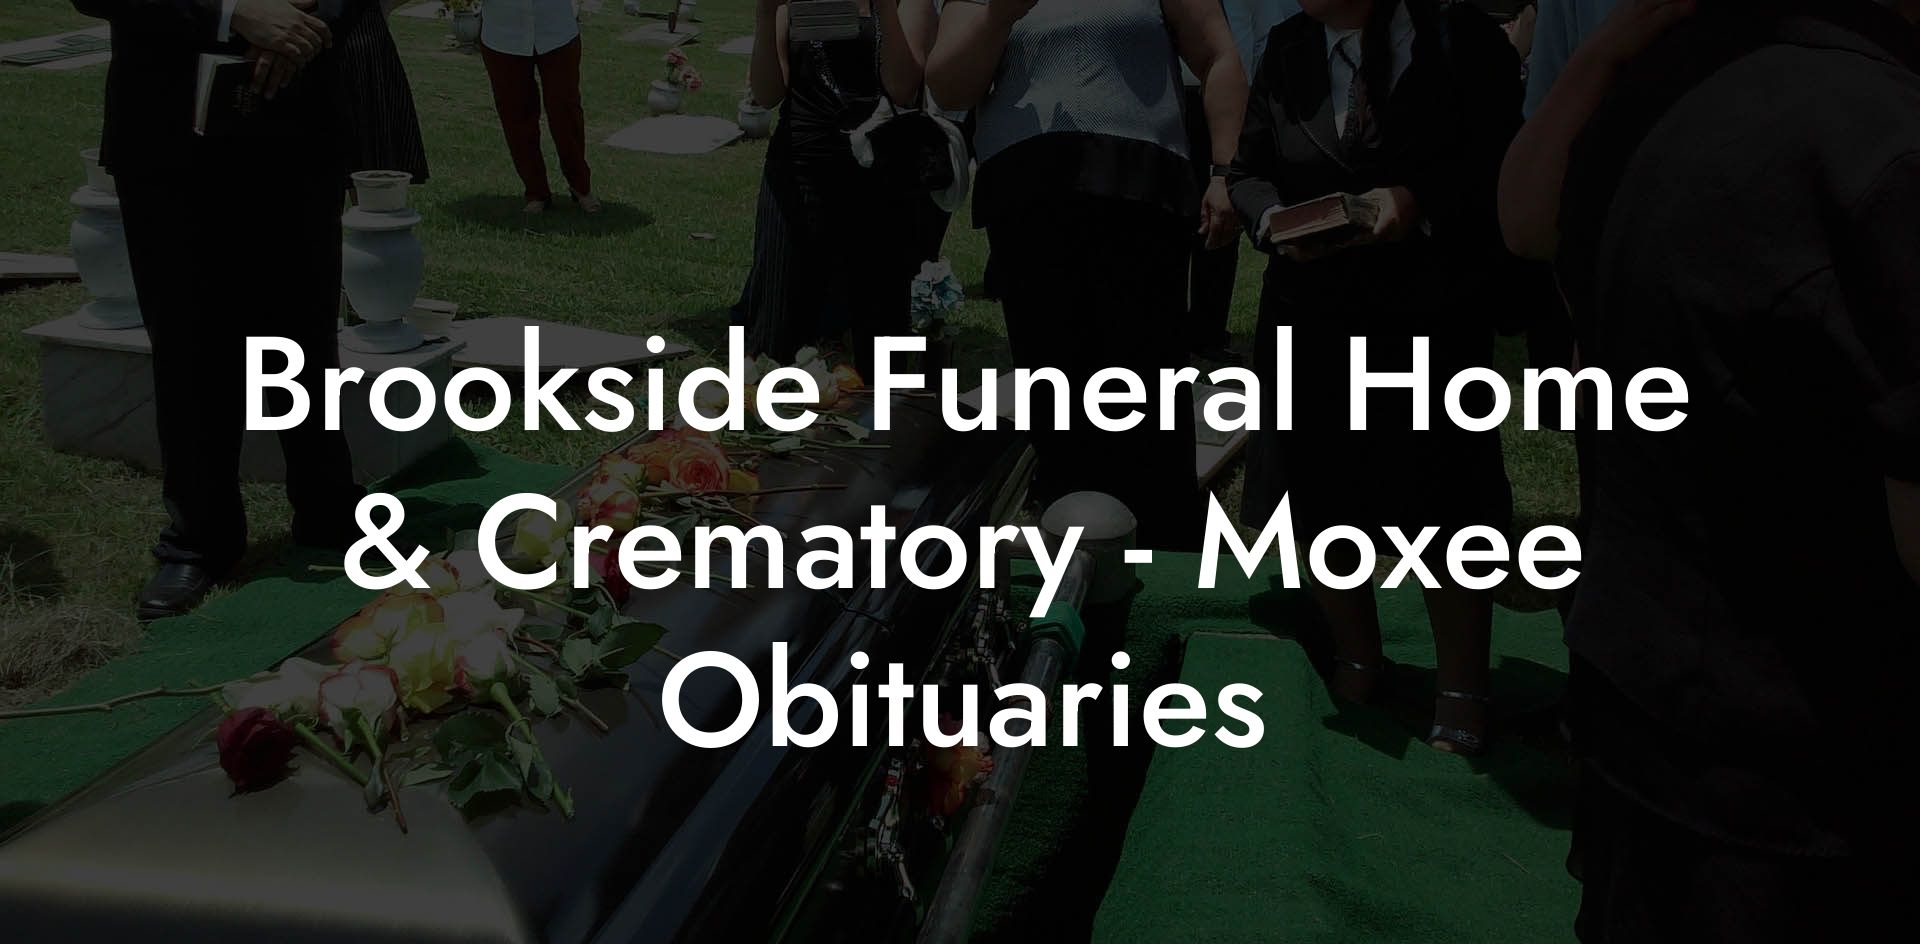 Brookside Funeral Home & Crematory - Moxee Obituaries